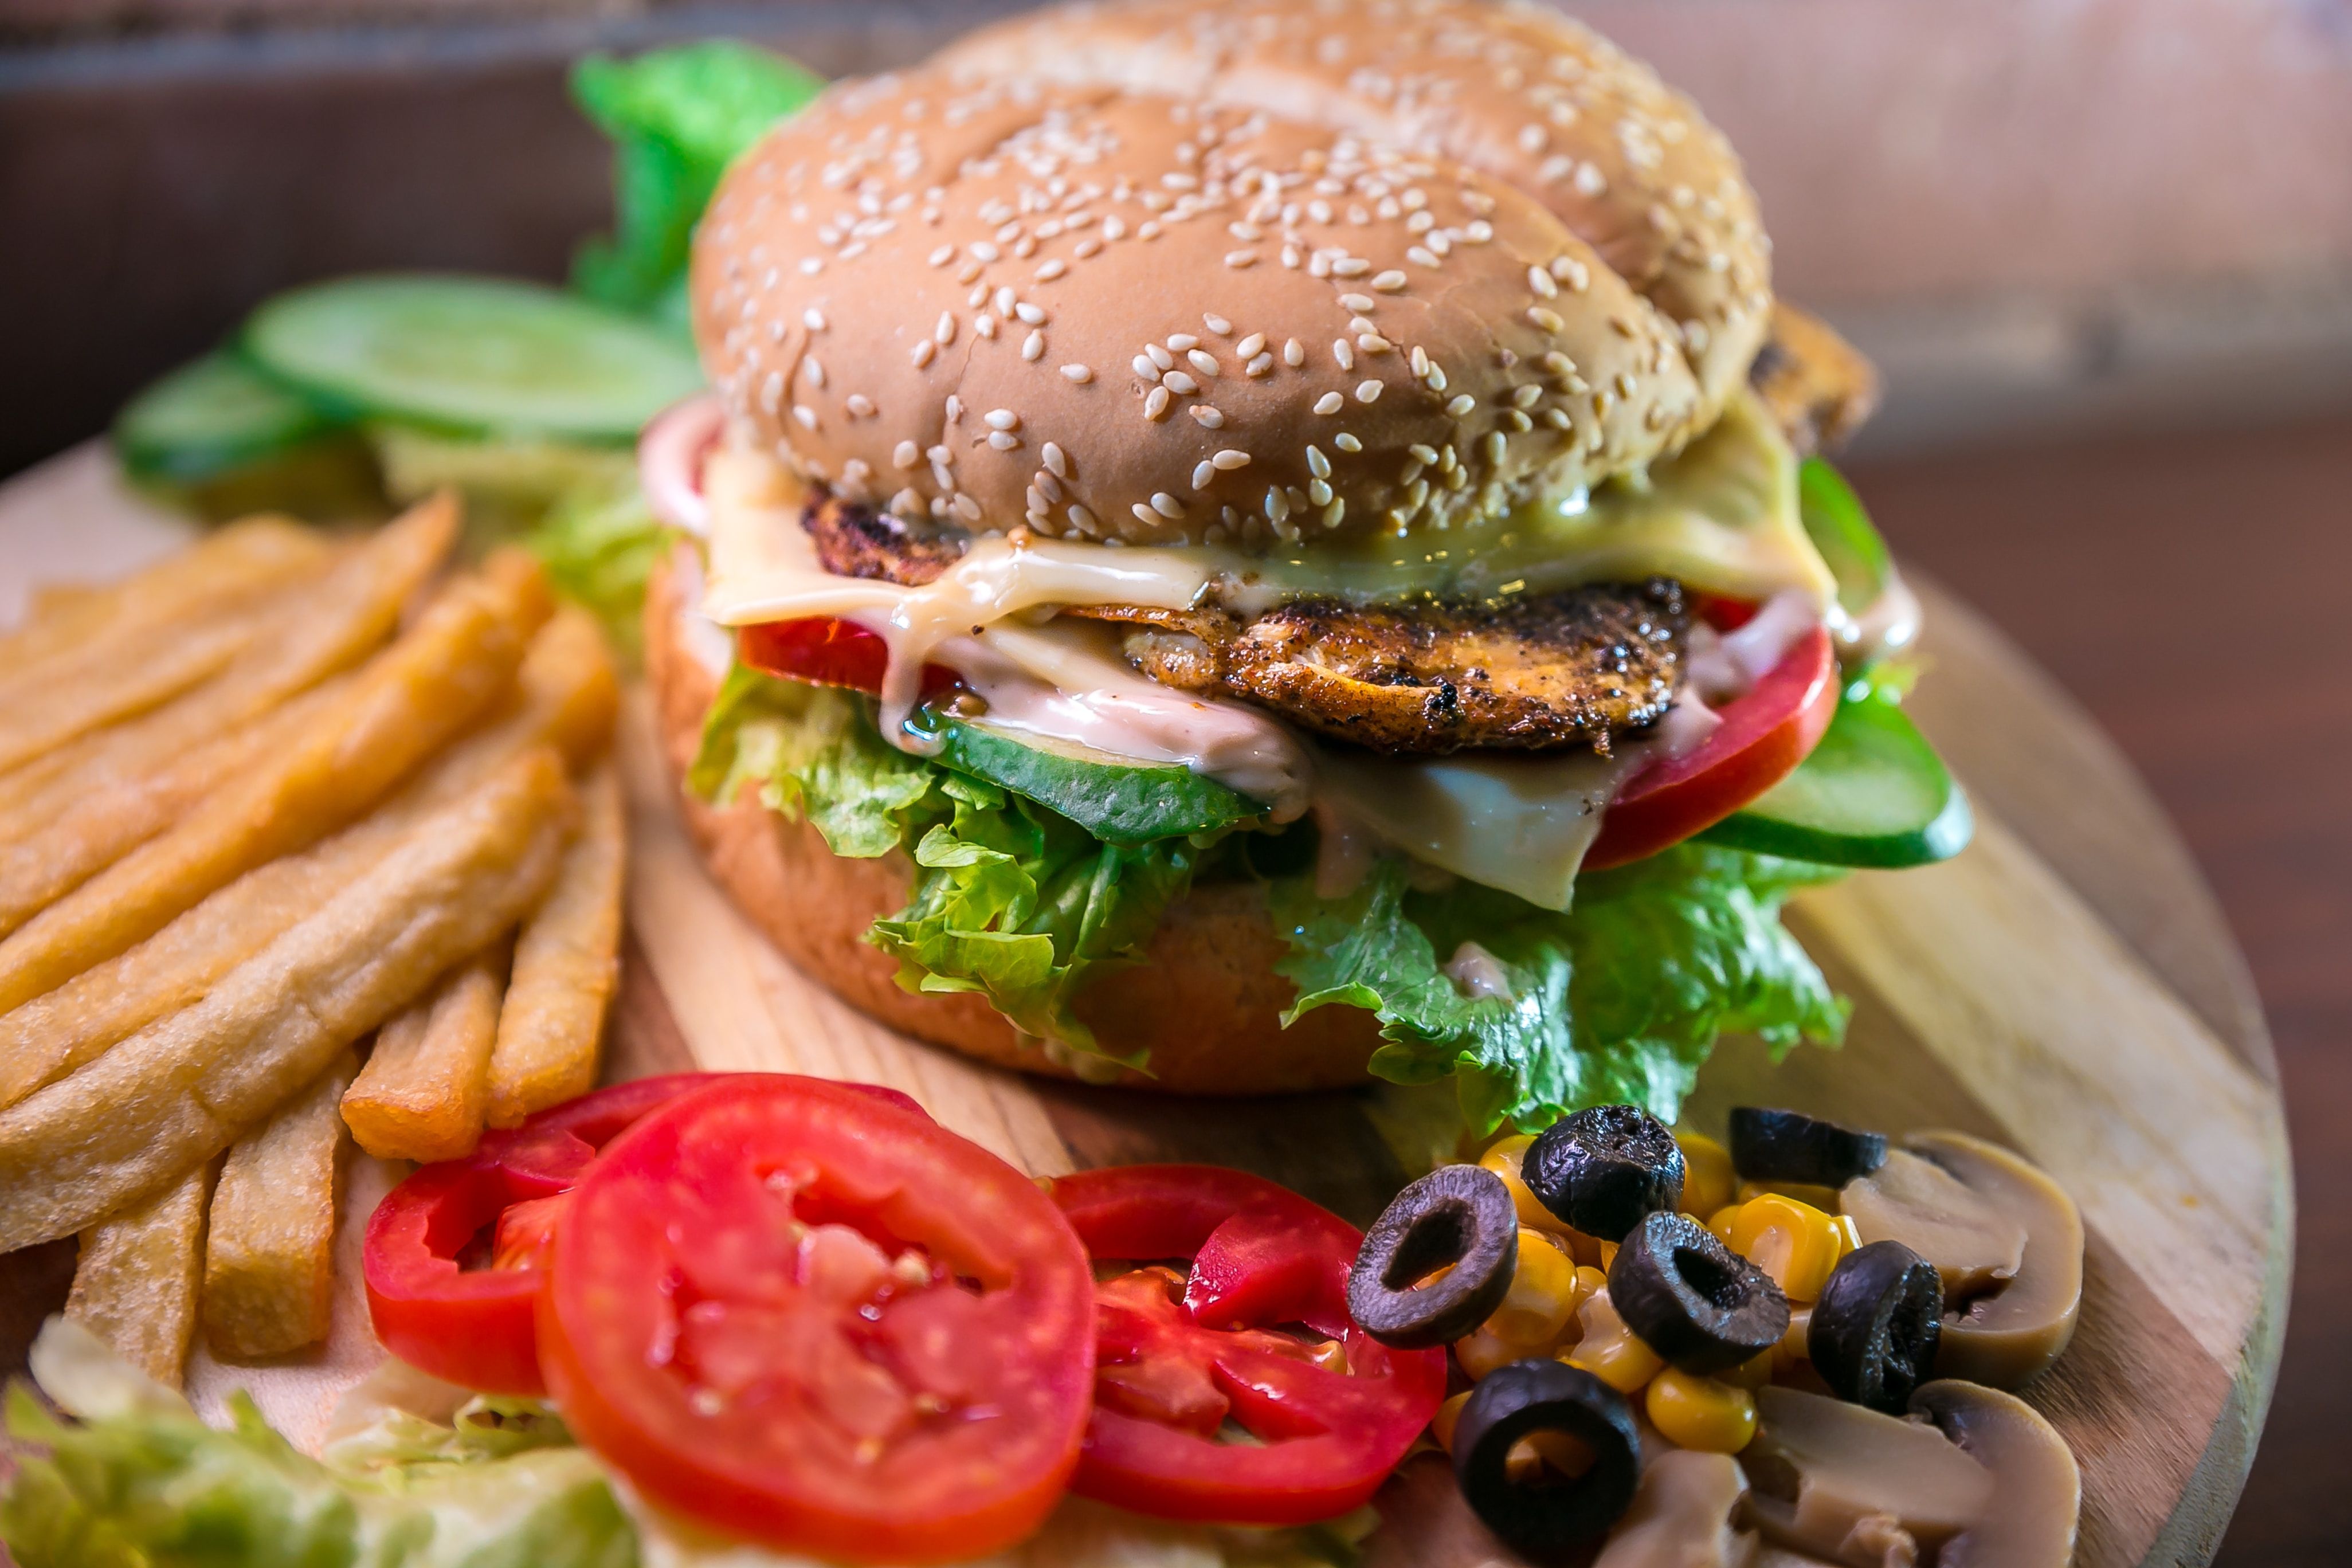 Burger on a table along with olives and other ingredients